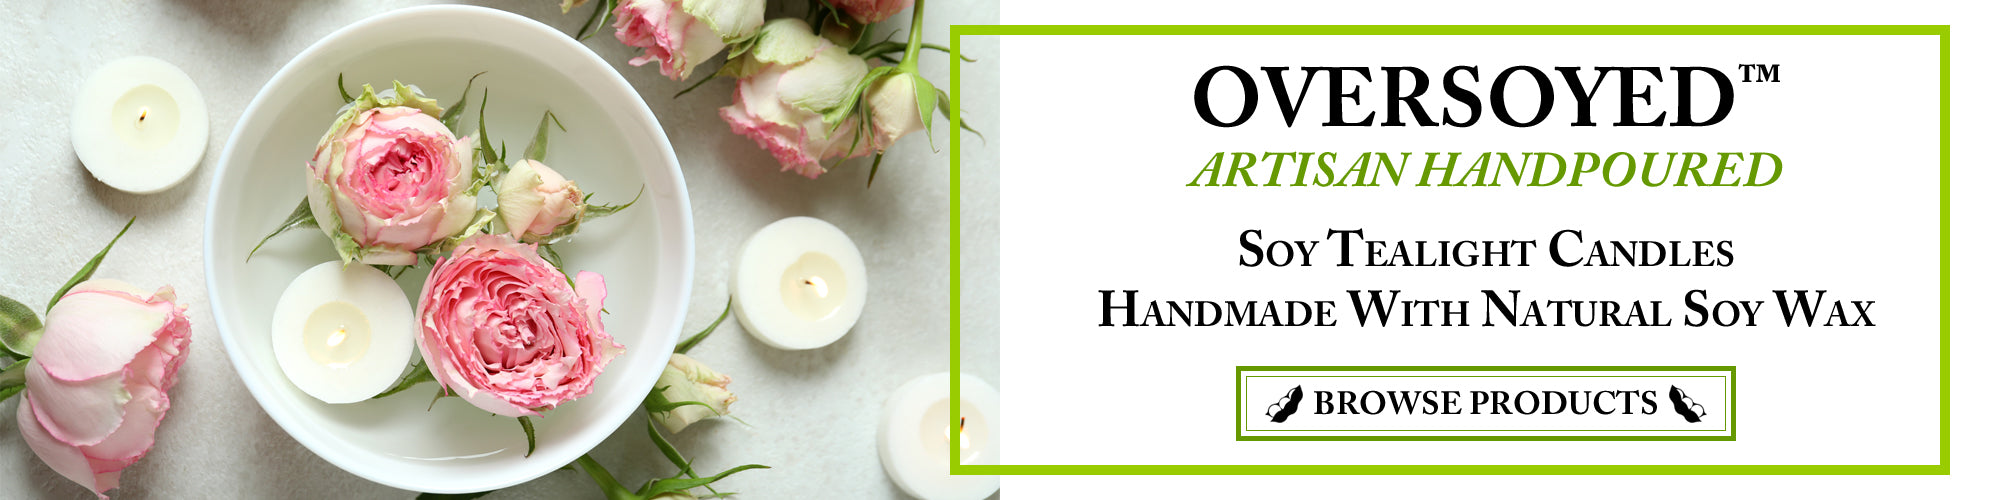 OverSoyed™ Artisan Handcrafted Hand Poured Soy Tealight Candles